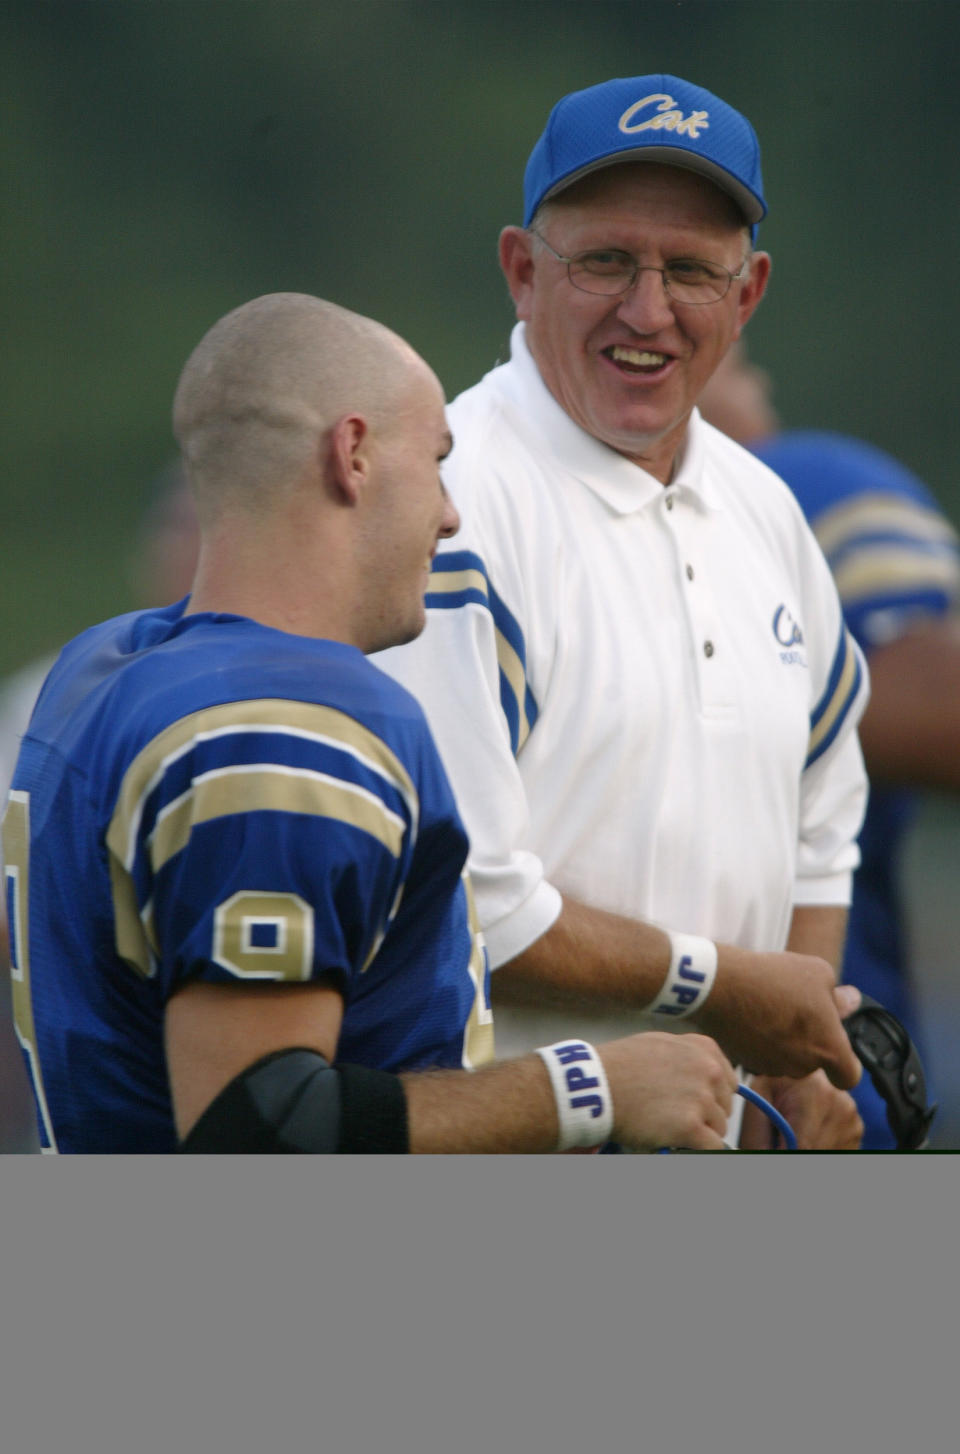 CAK  coach Bill Young laughs with player Taylor Yoakley in 1998.